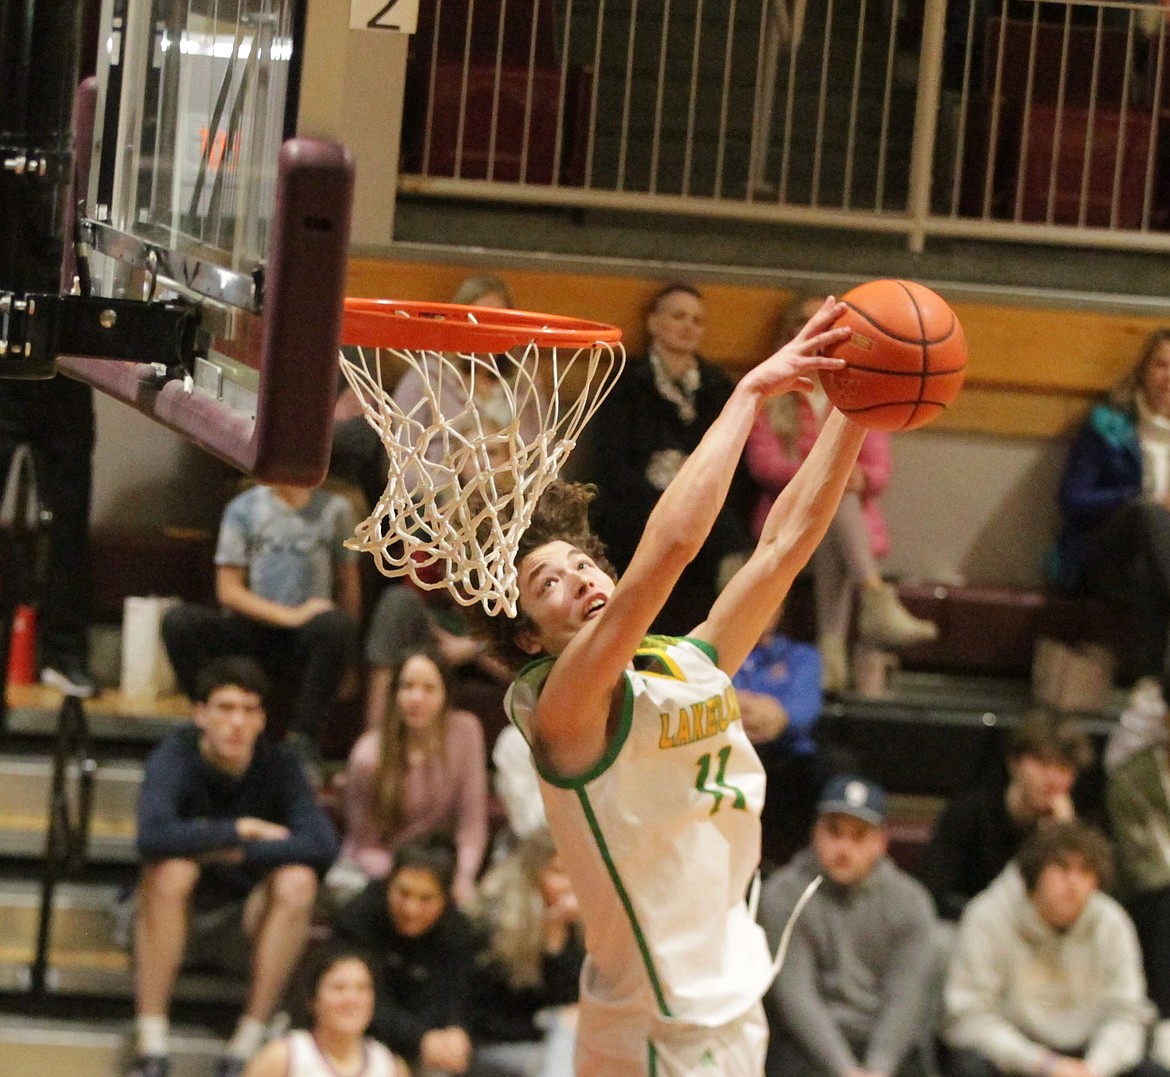 JASON ELLIOTT/Press
Lakeland High senior Bryce Henry looks to put away his dunk attempt during the first round of the boys slam dunk contest at North Idaho College on Saturday.